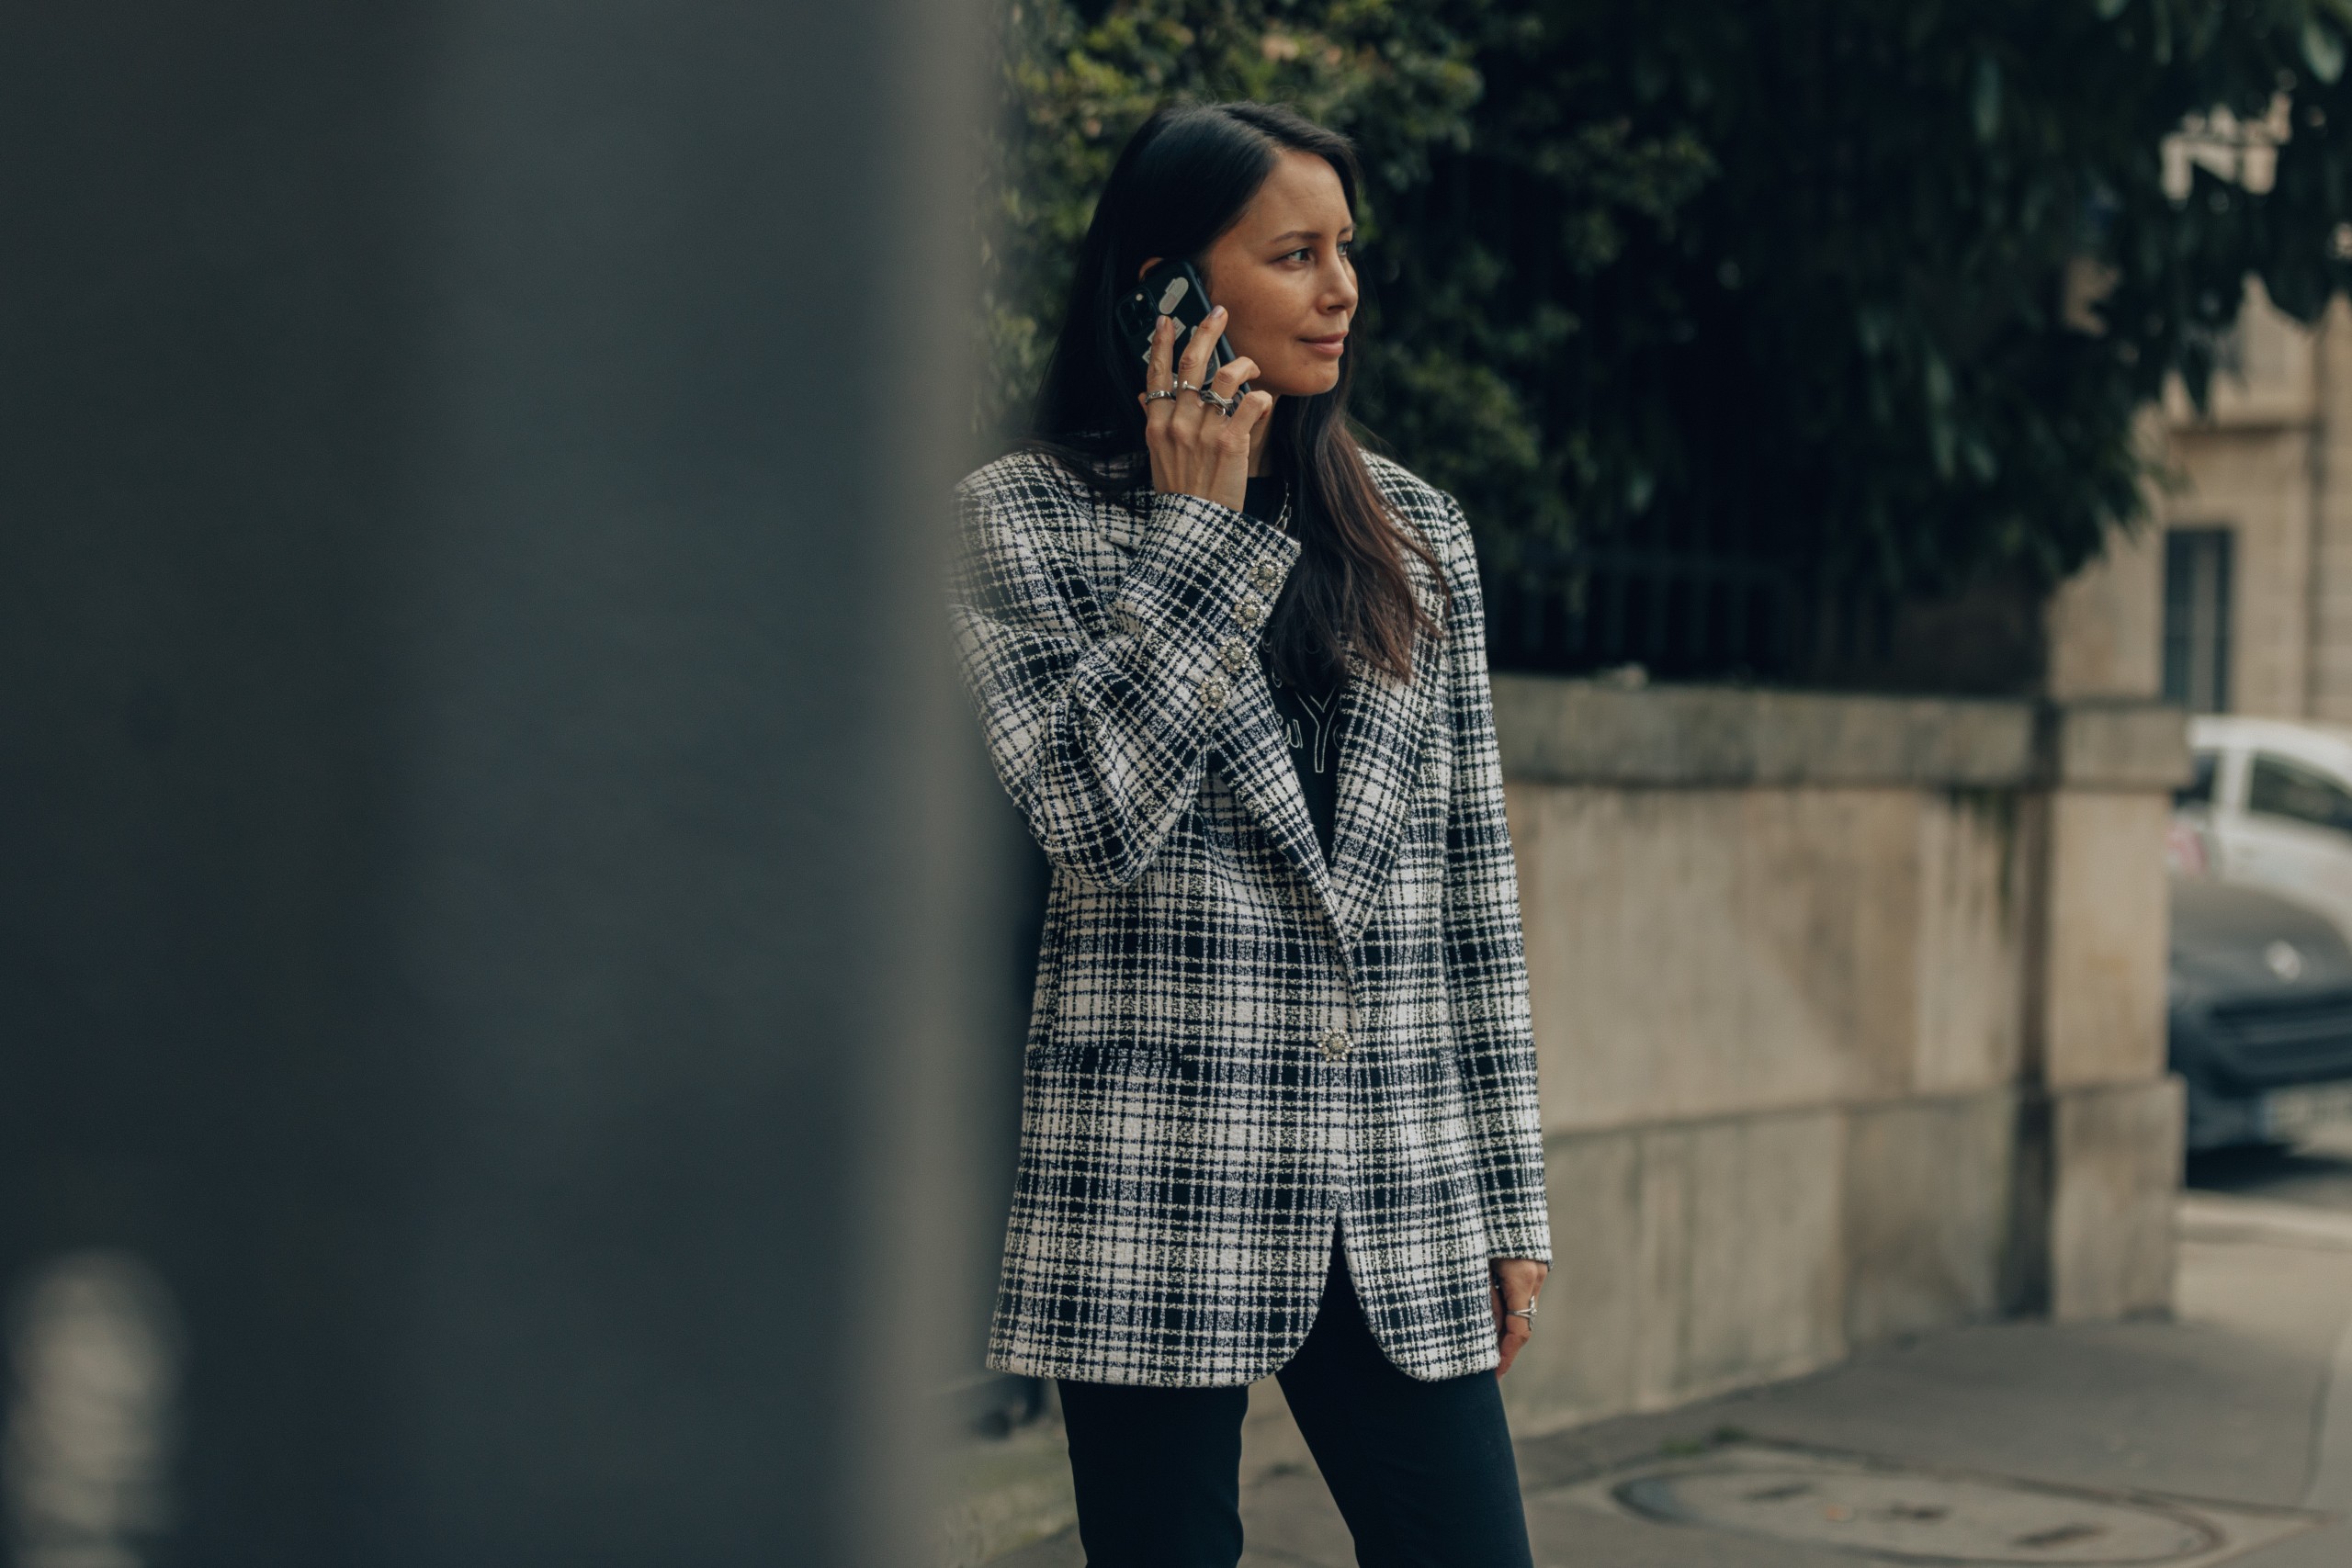 A Street Style with Mélanie Huynh